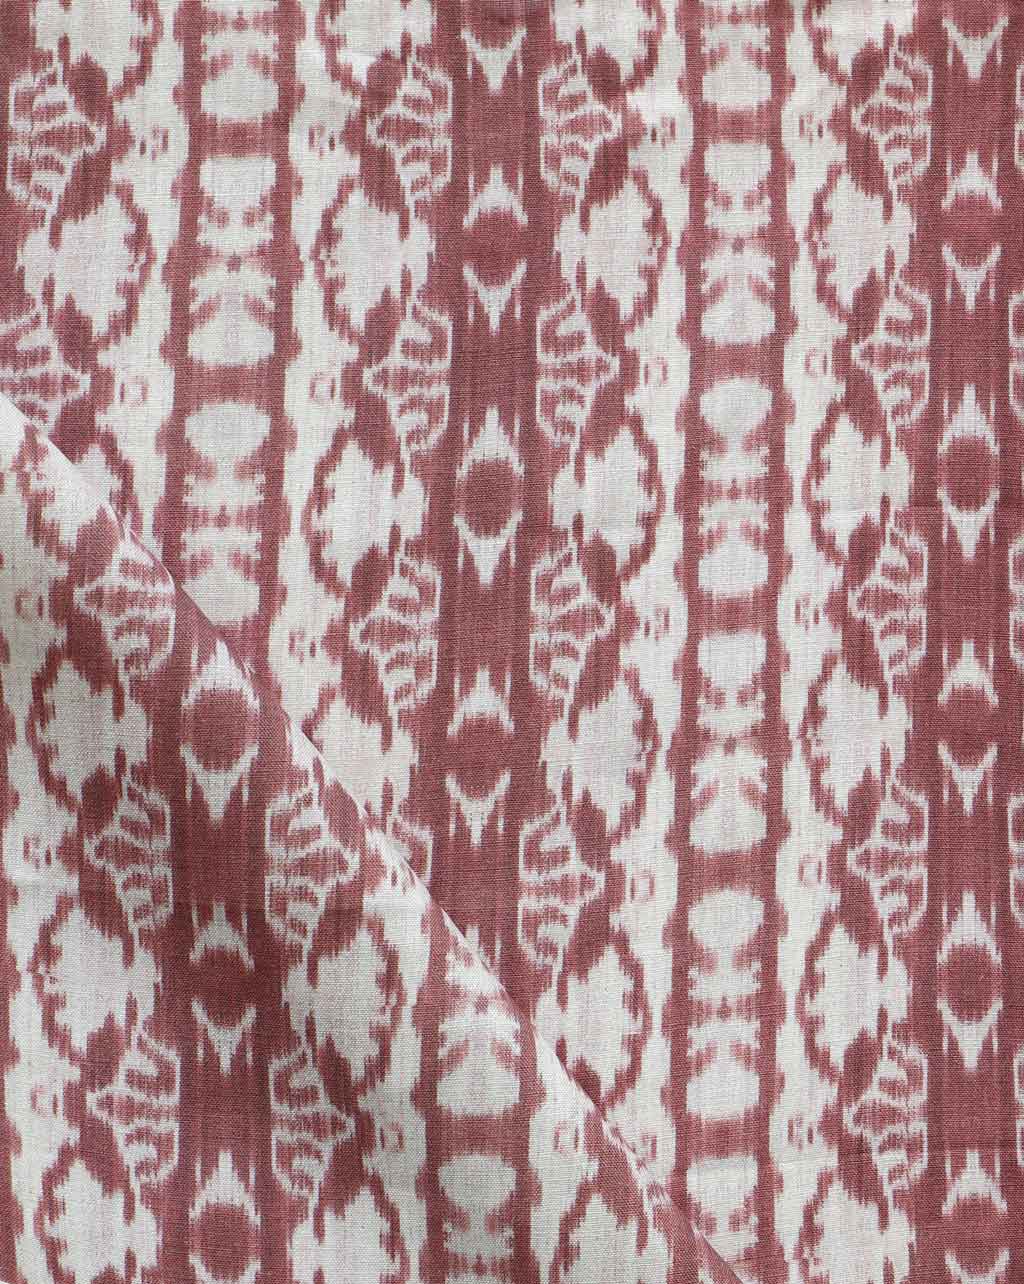 A red and white Bali Stripe Fabric with a geometric pattern offers a high-end and luxurious look